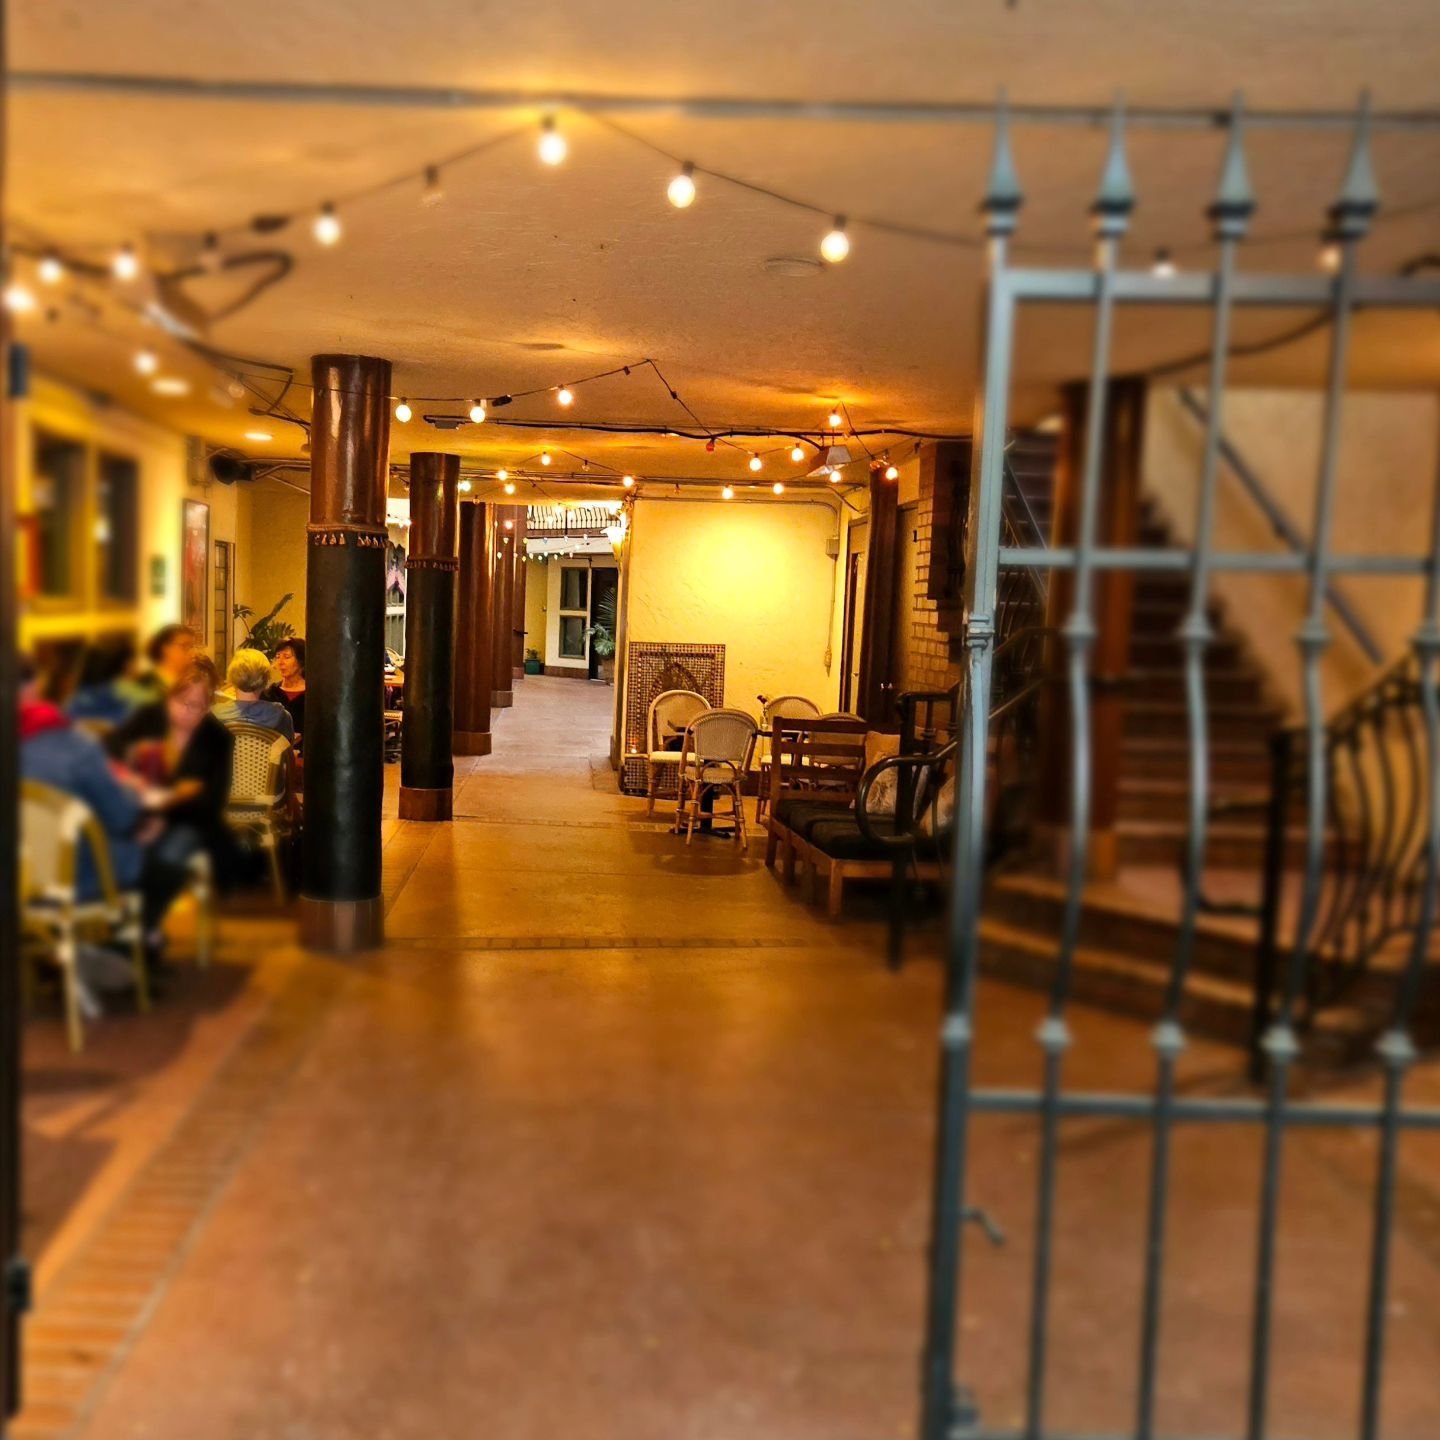 Our Courtyard stays cozy and is fully covered!  Perfect for Sacramento Spring and its unpredictable drizzles

OPEN 11:30am-10pm 

Live Spanish Guitar tonight 6:30pm-9pm

Reservations Recommended, but Walk -Ins always welcome!
&bull;
&bull;
#sacrament